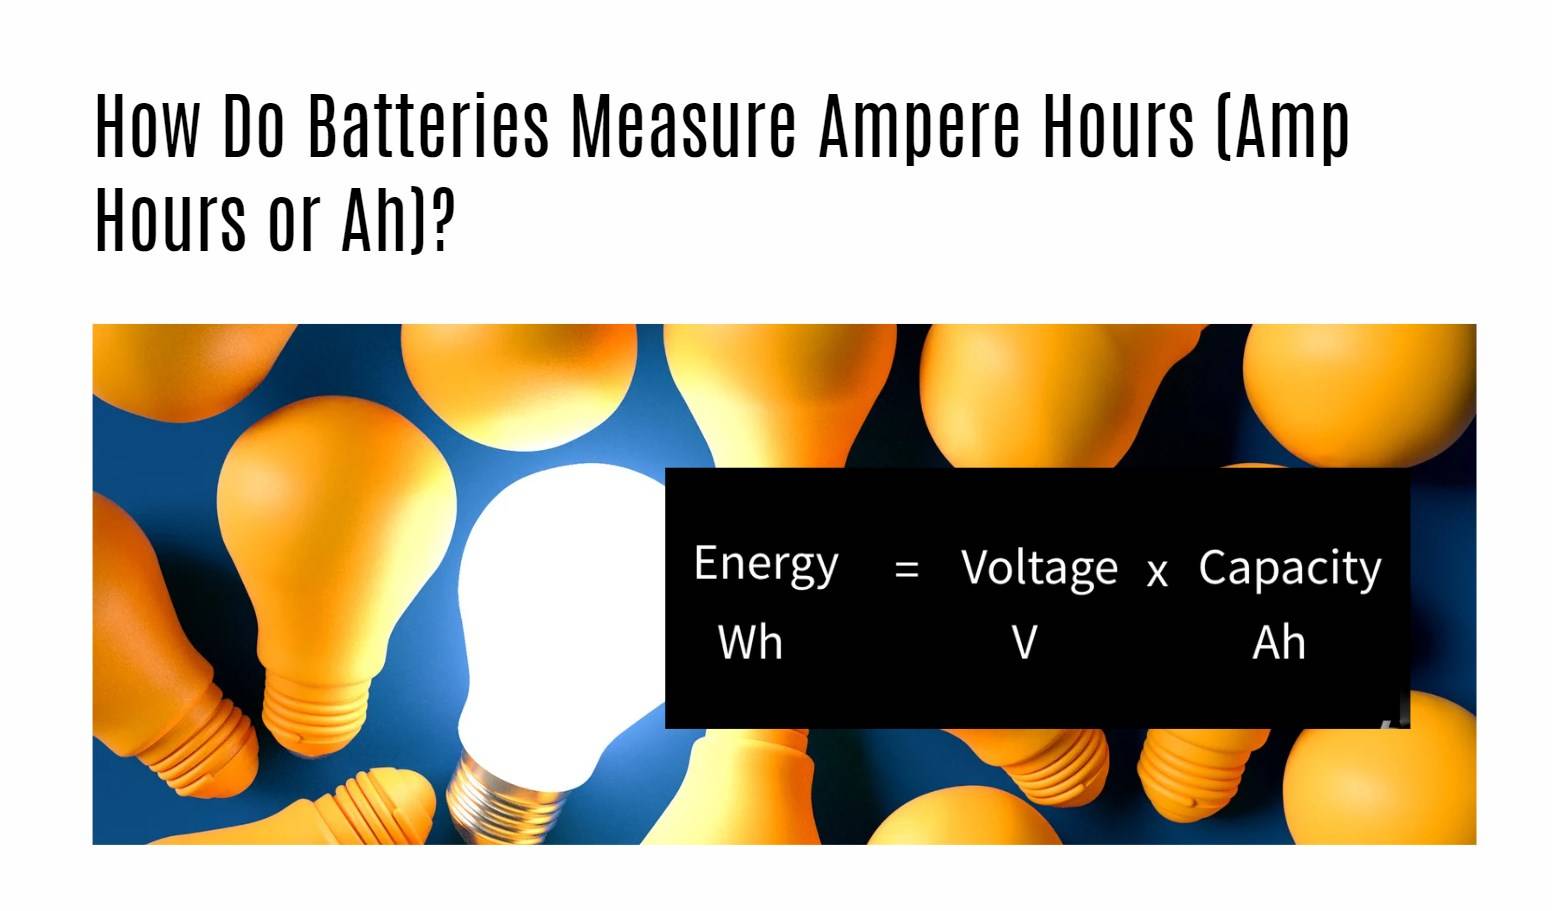 How Do Batteries Measure Ampere Hours (Amp Hours or Ah)?